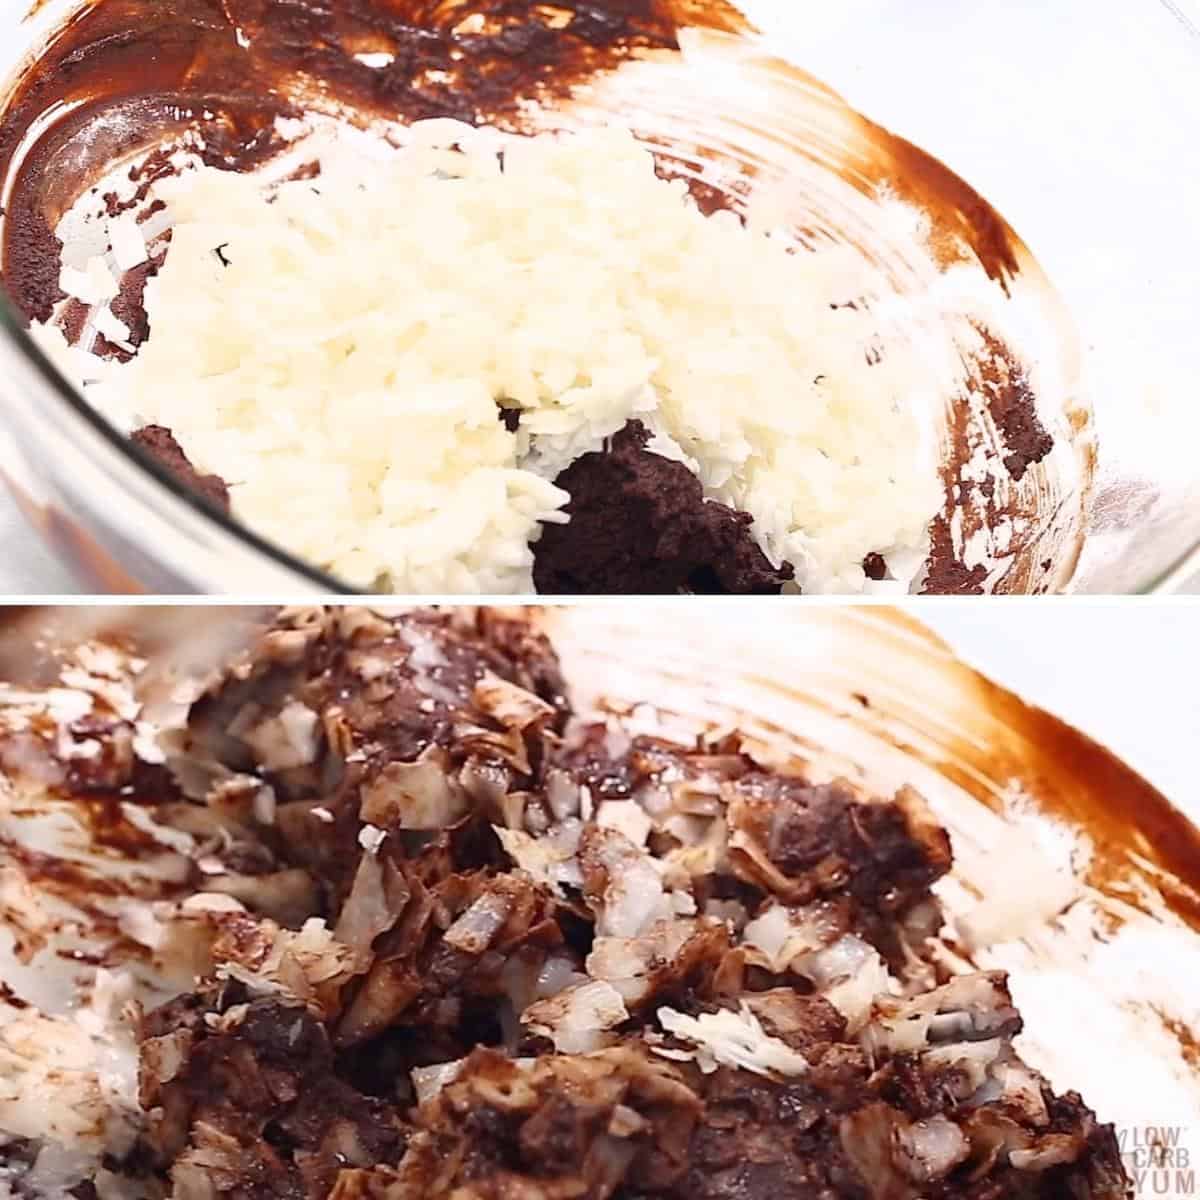 mixing coconut into melted chocolate.